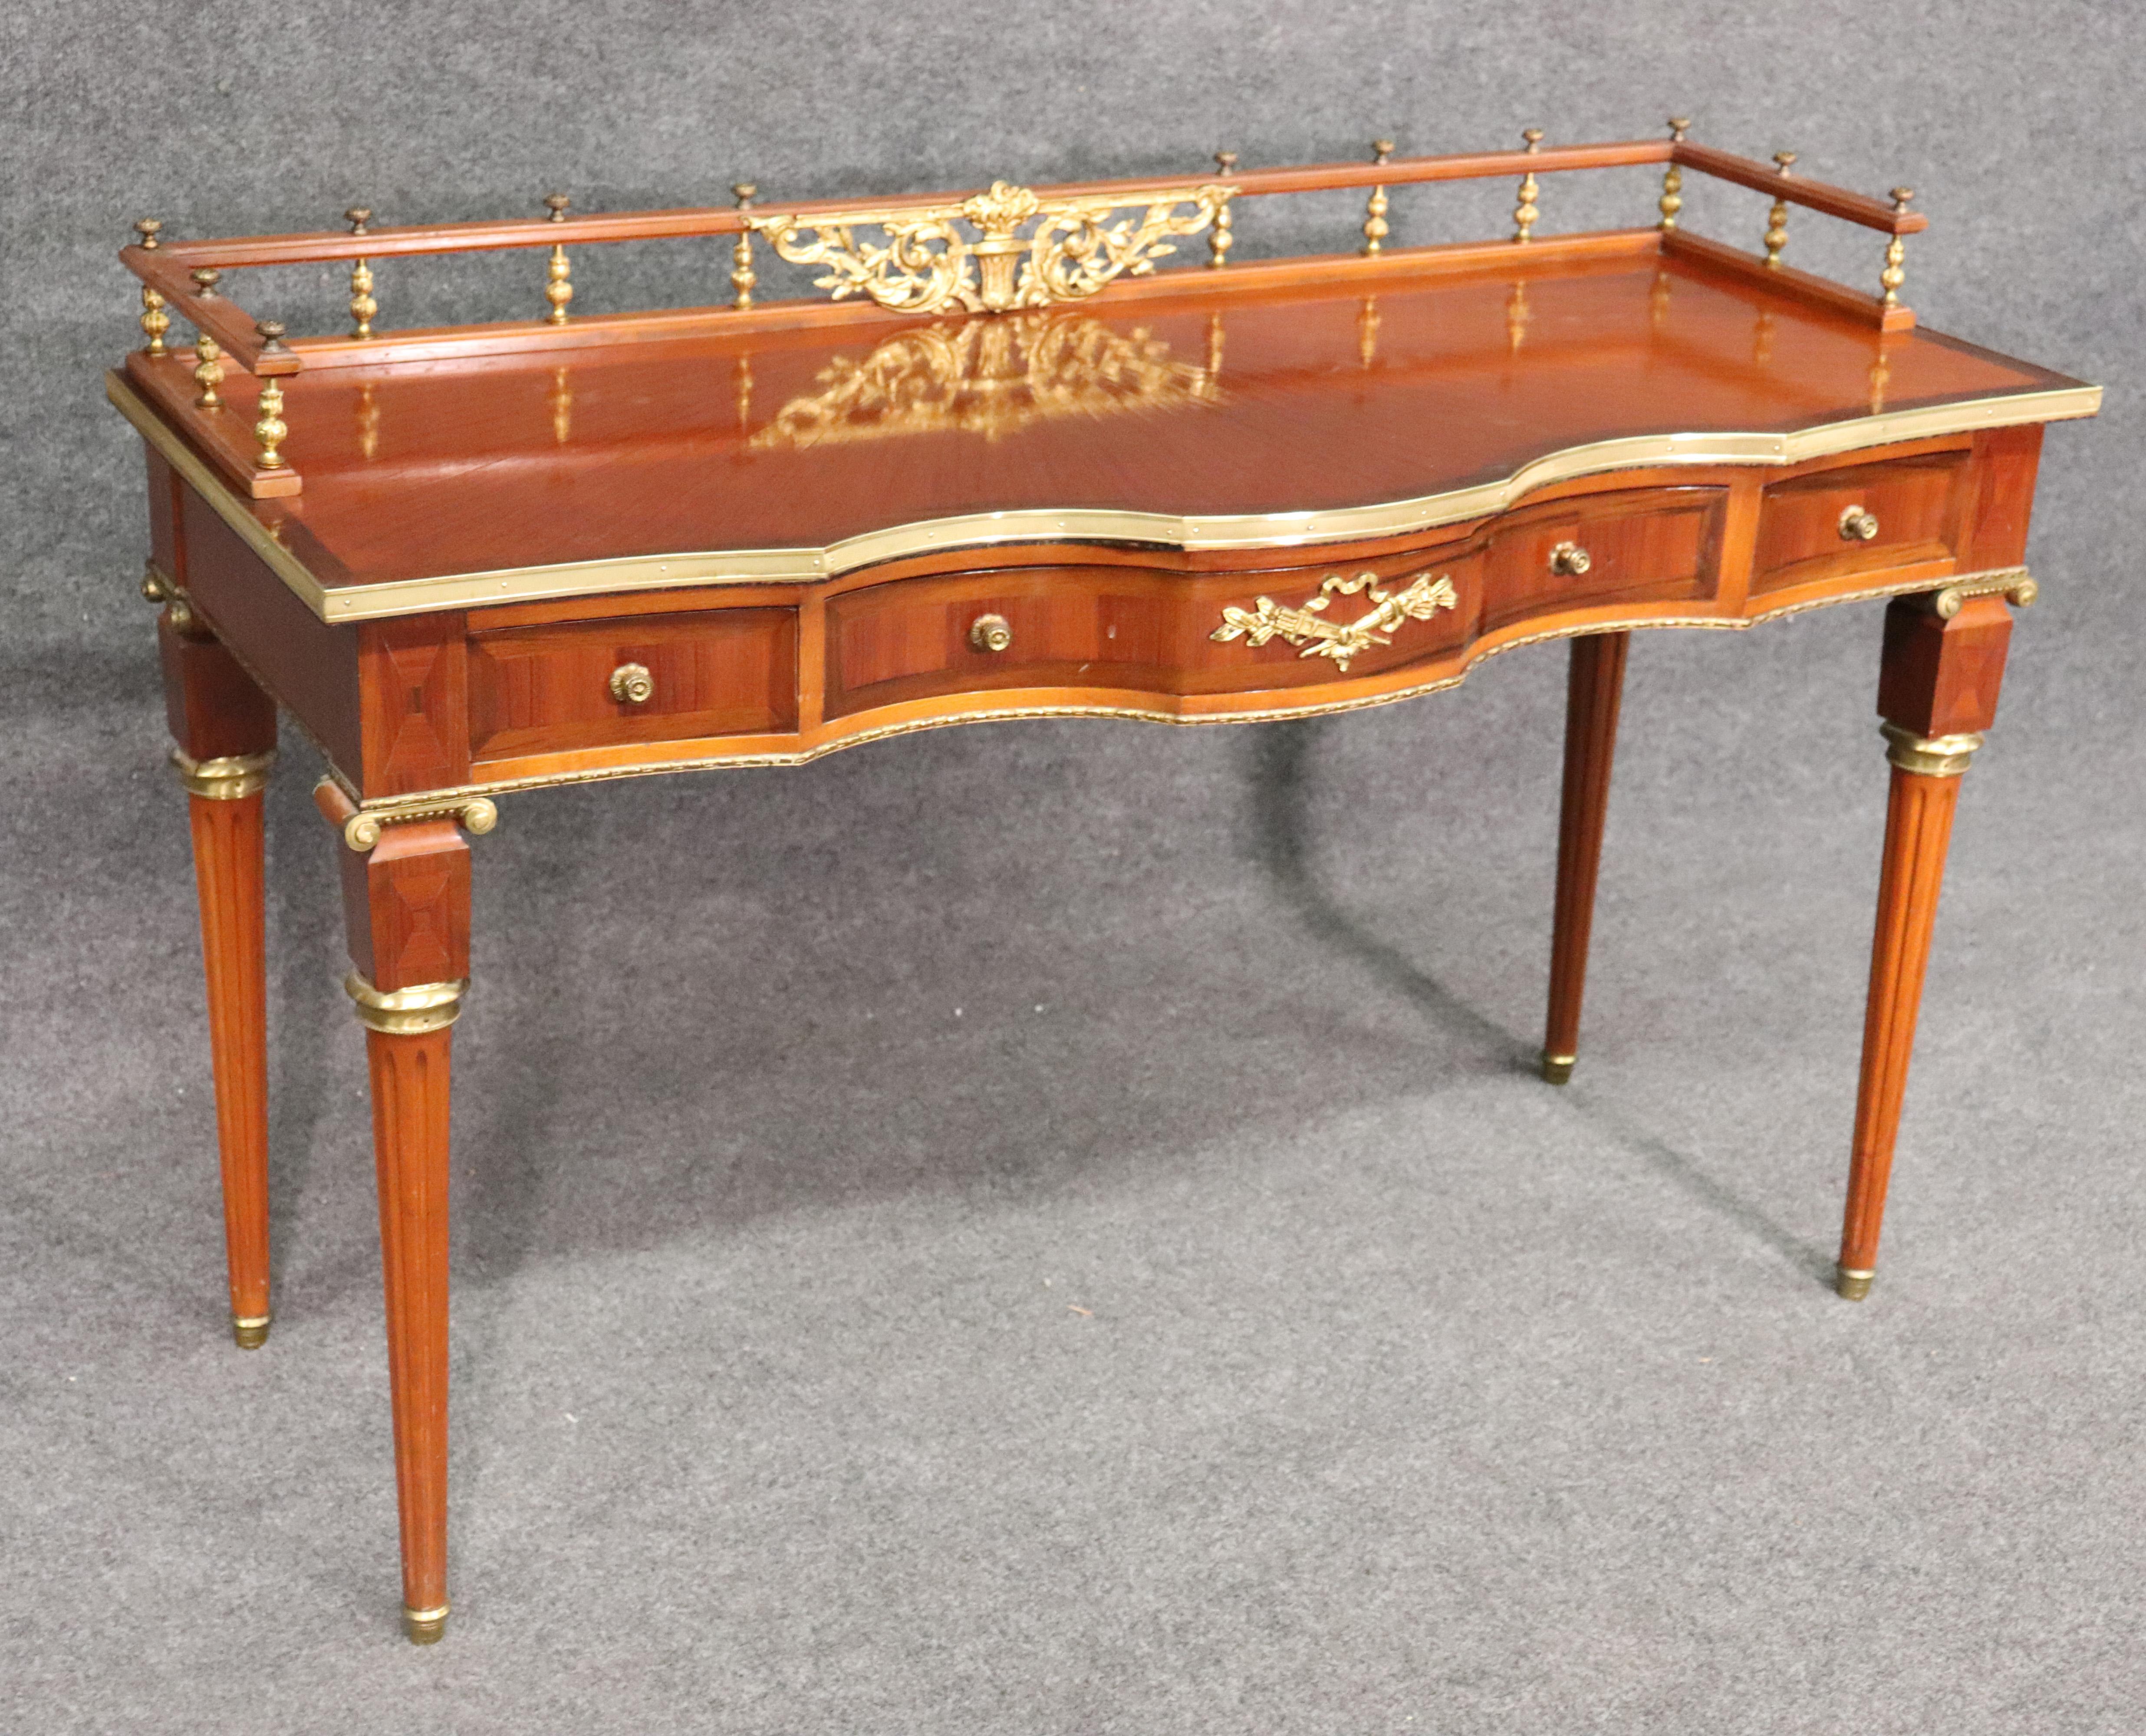 This is a fantastic writing table with gilded bronze ormolu and fantastic satinwood. The desk has a beautiful gallery that surrounds the top and is in very good condition for its age. The desk measures 50 wide x 33 tall to the top of the gallery and